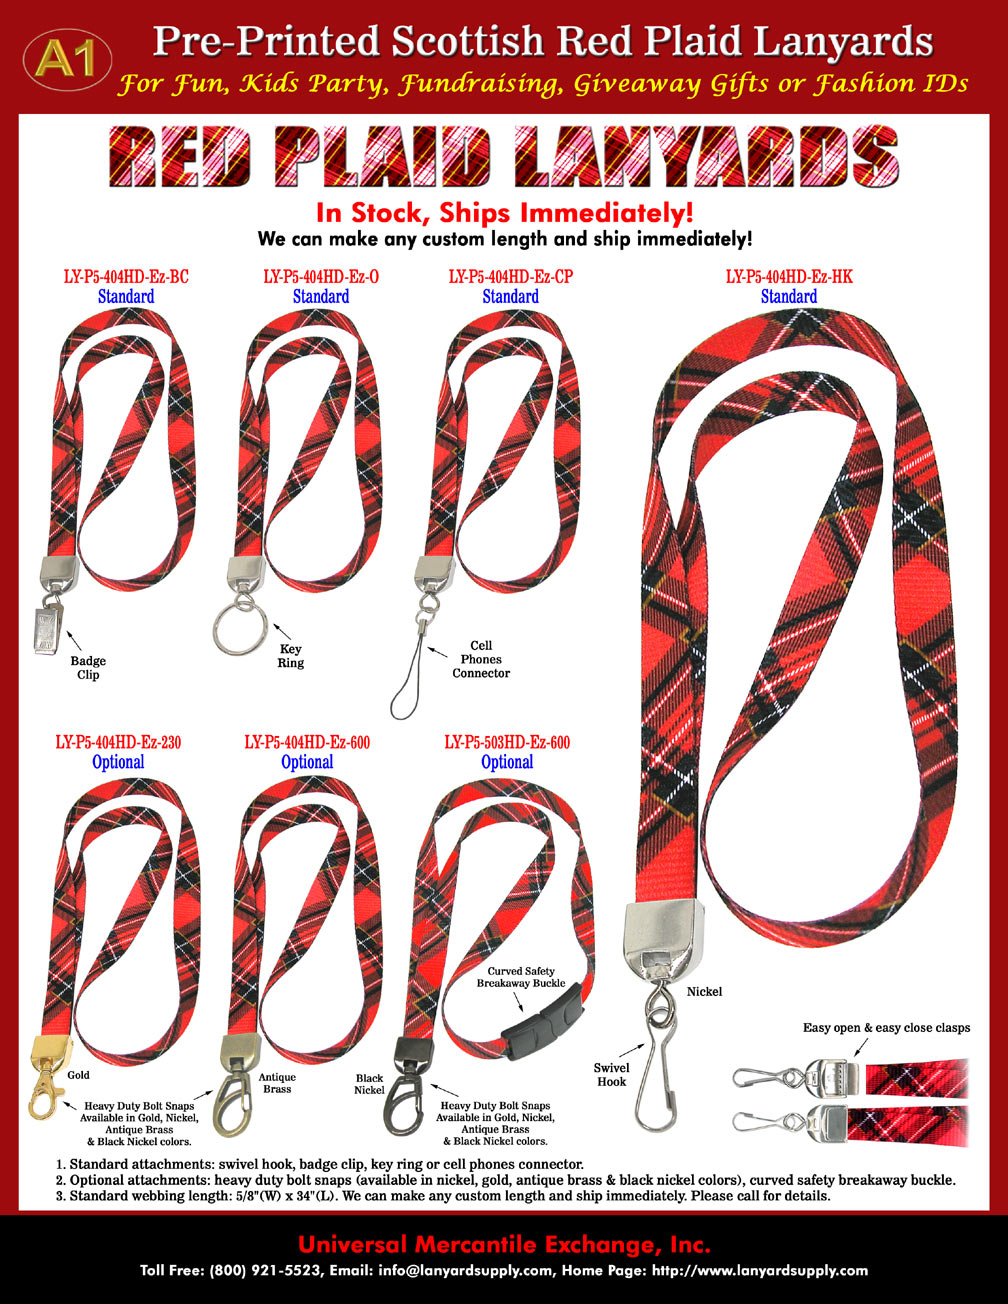 The Scottish or Irish style red tartan or plaid lanyards come with pre-printed red color plaid patterns.